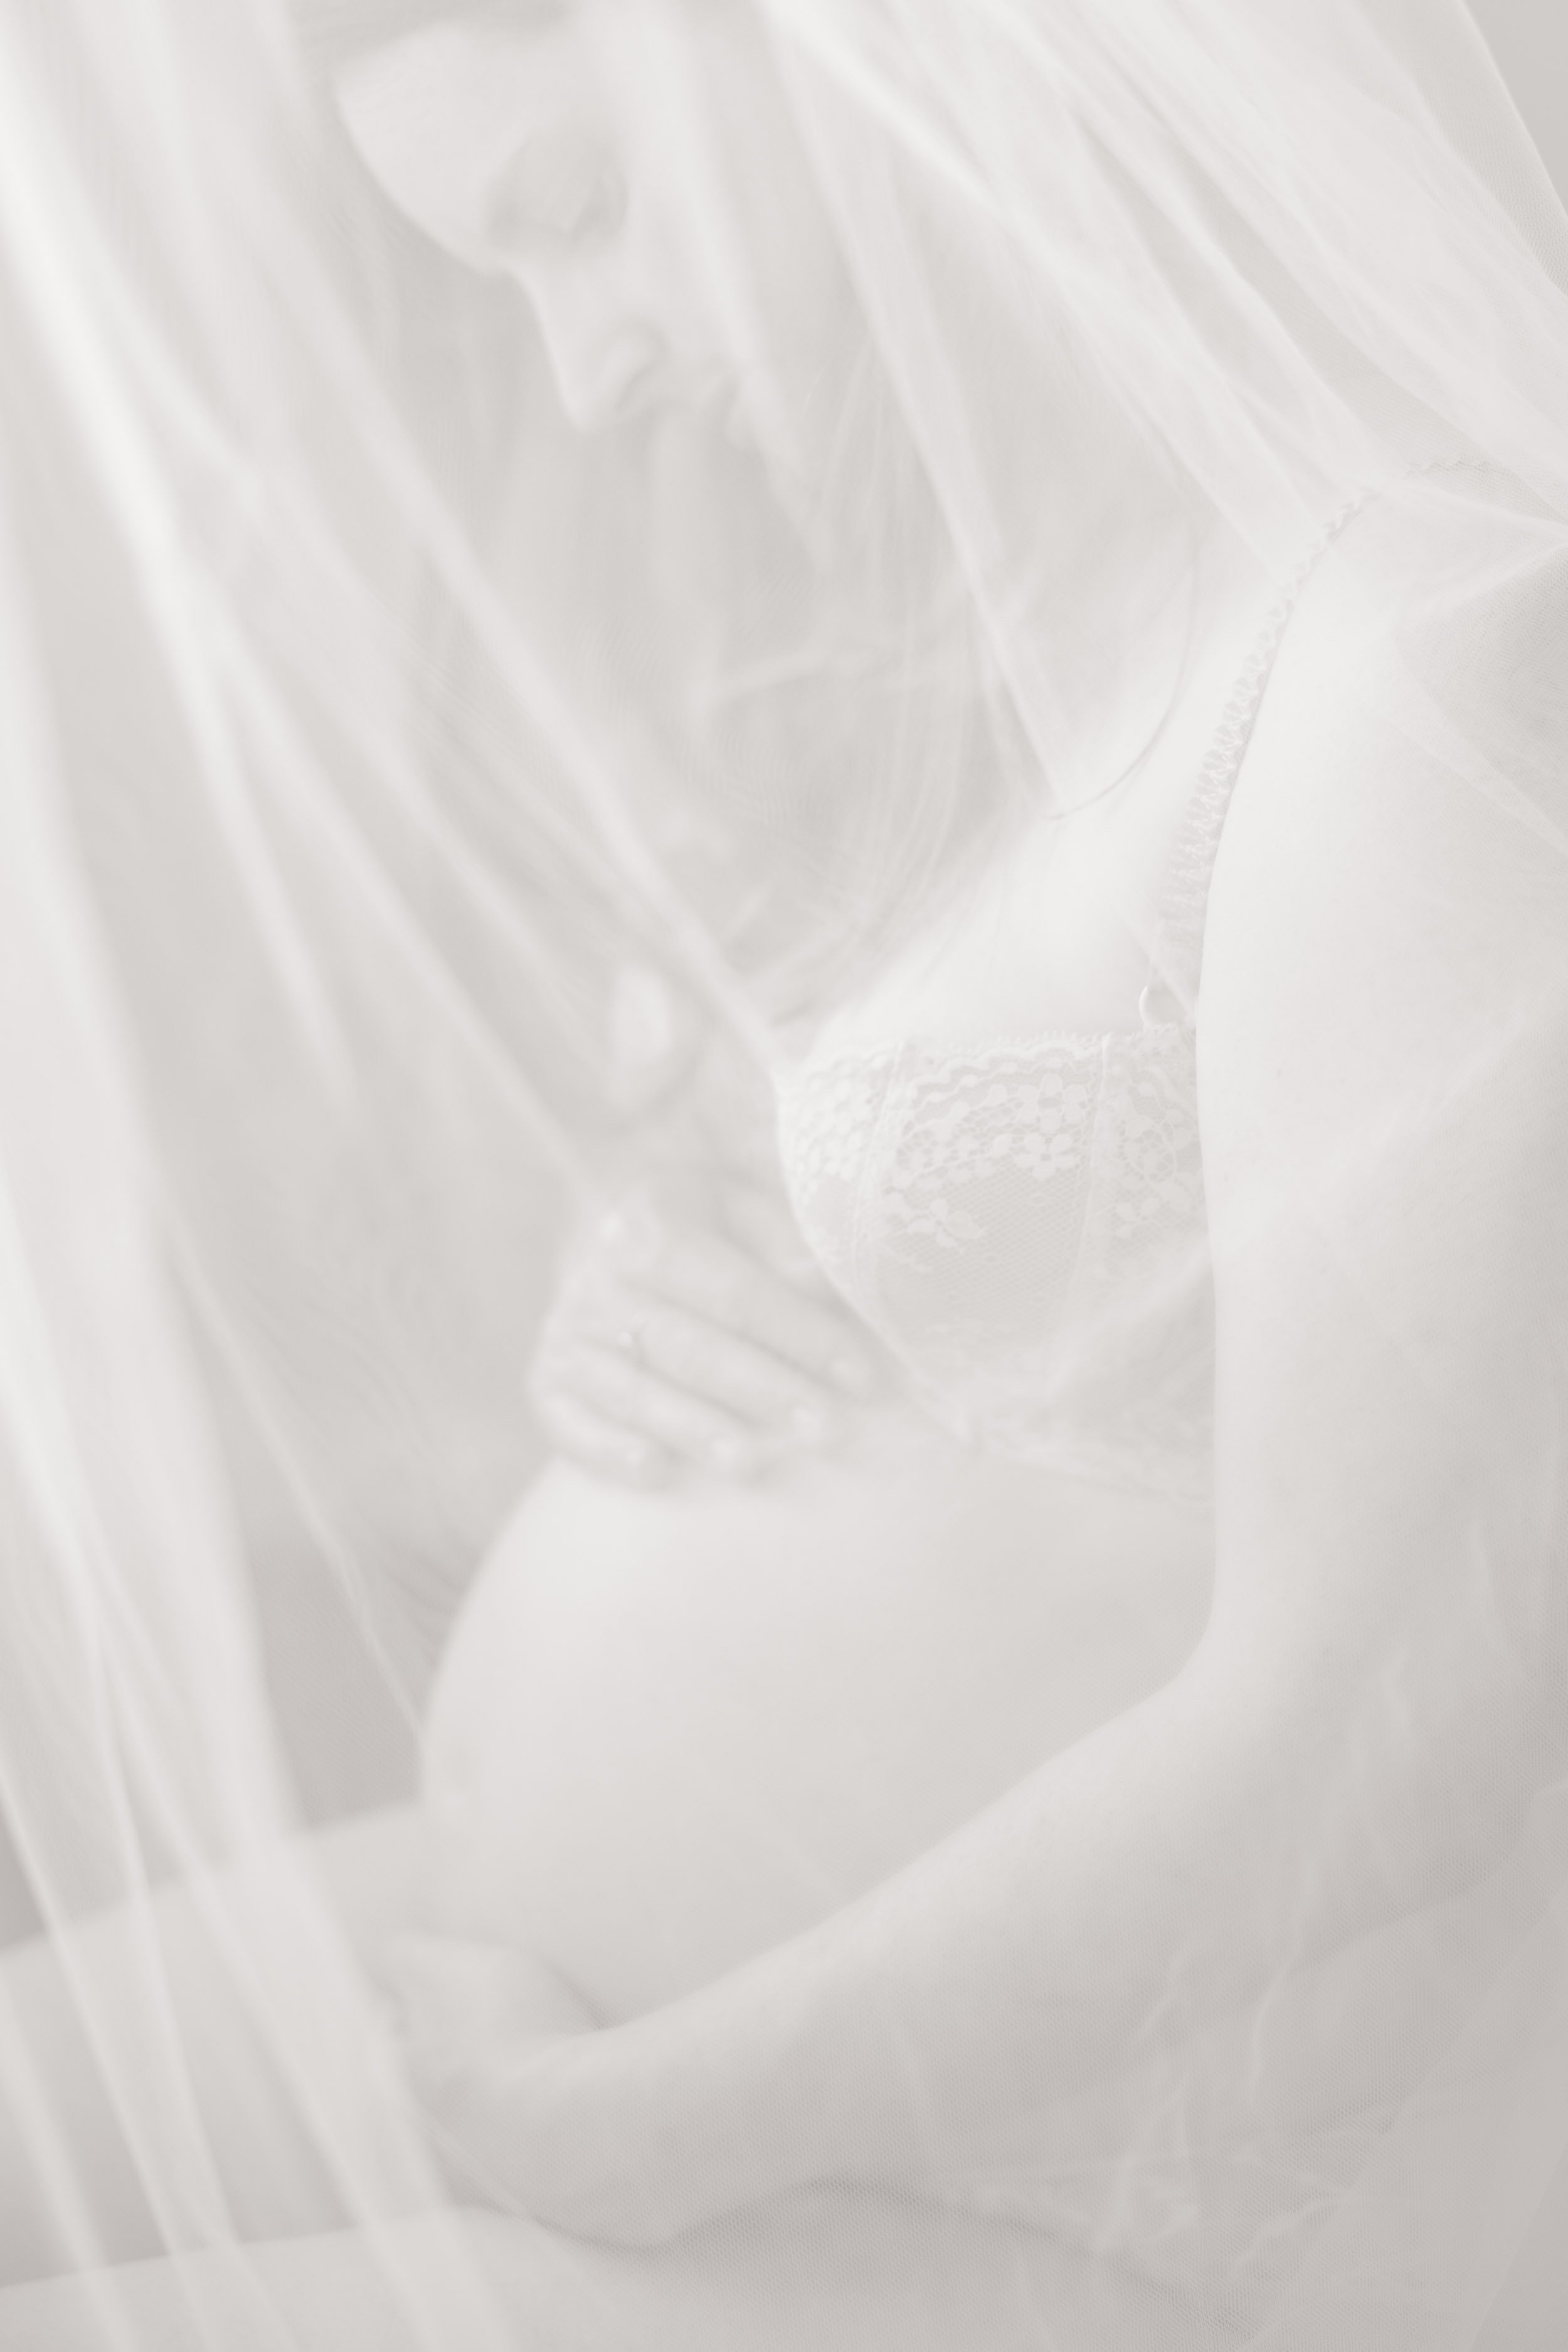 Perth_in_home_photographer_maternity_001.jpg